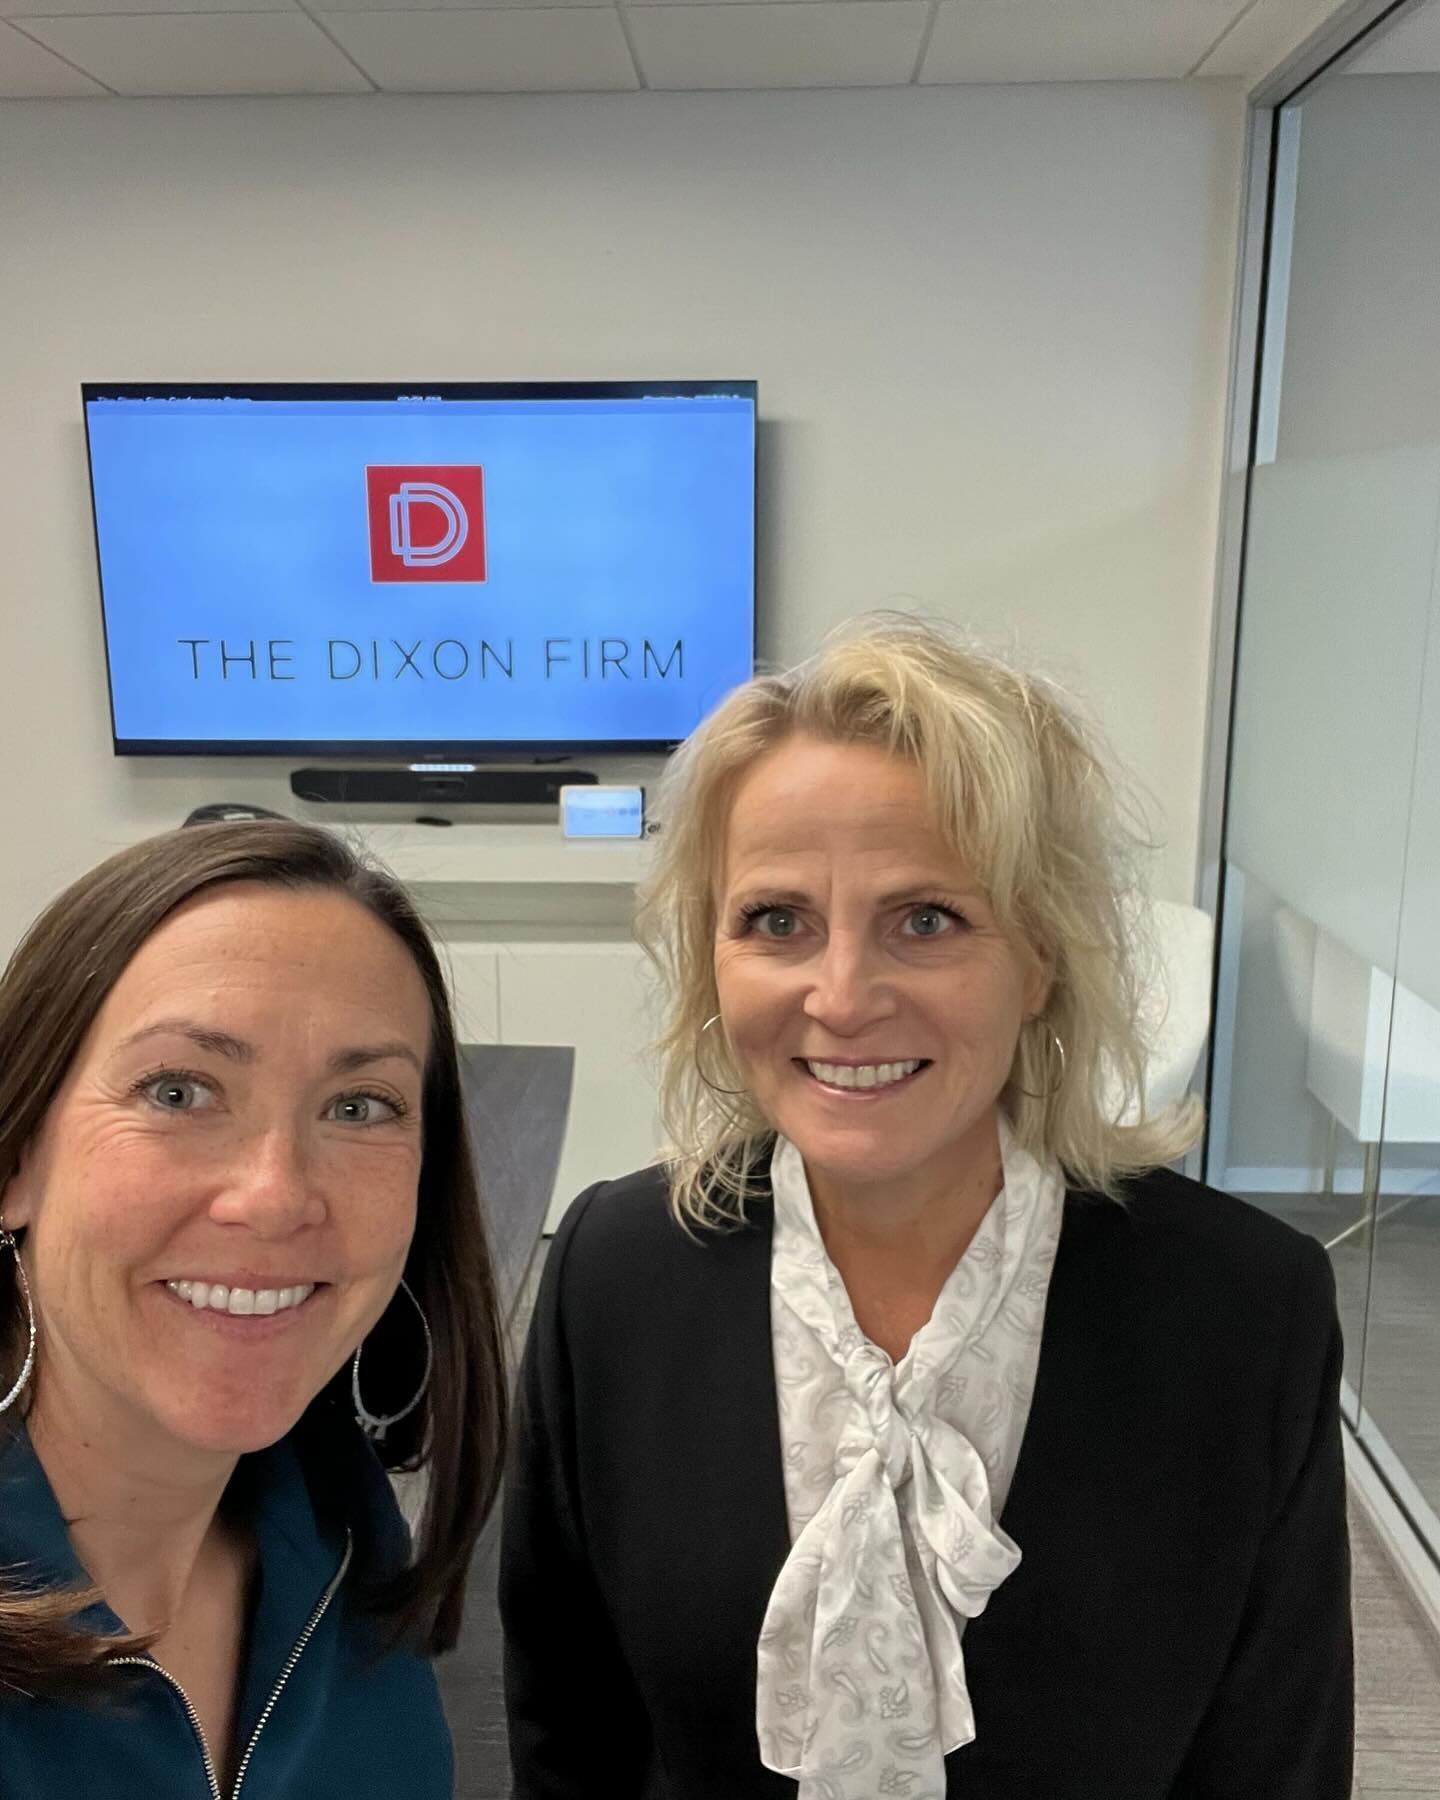 This is why it&rsquo;s worth it to travel across the country to your clients 👇

Nothing beats a face-to-face strategic planning meeting with a team of creative, innovative minds. 

My fellow @point.northeast advisor Laura Raether and I had the privi